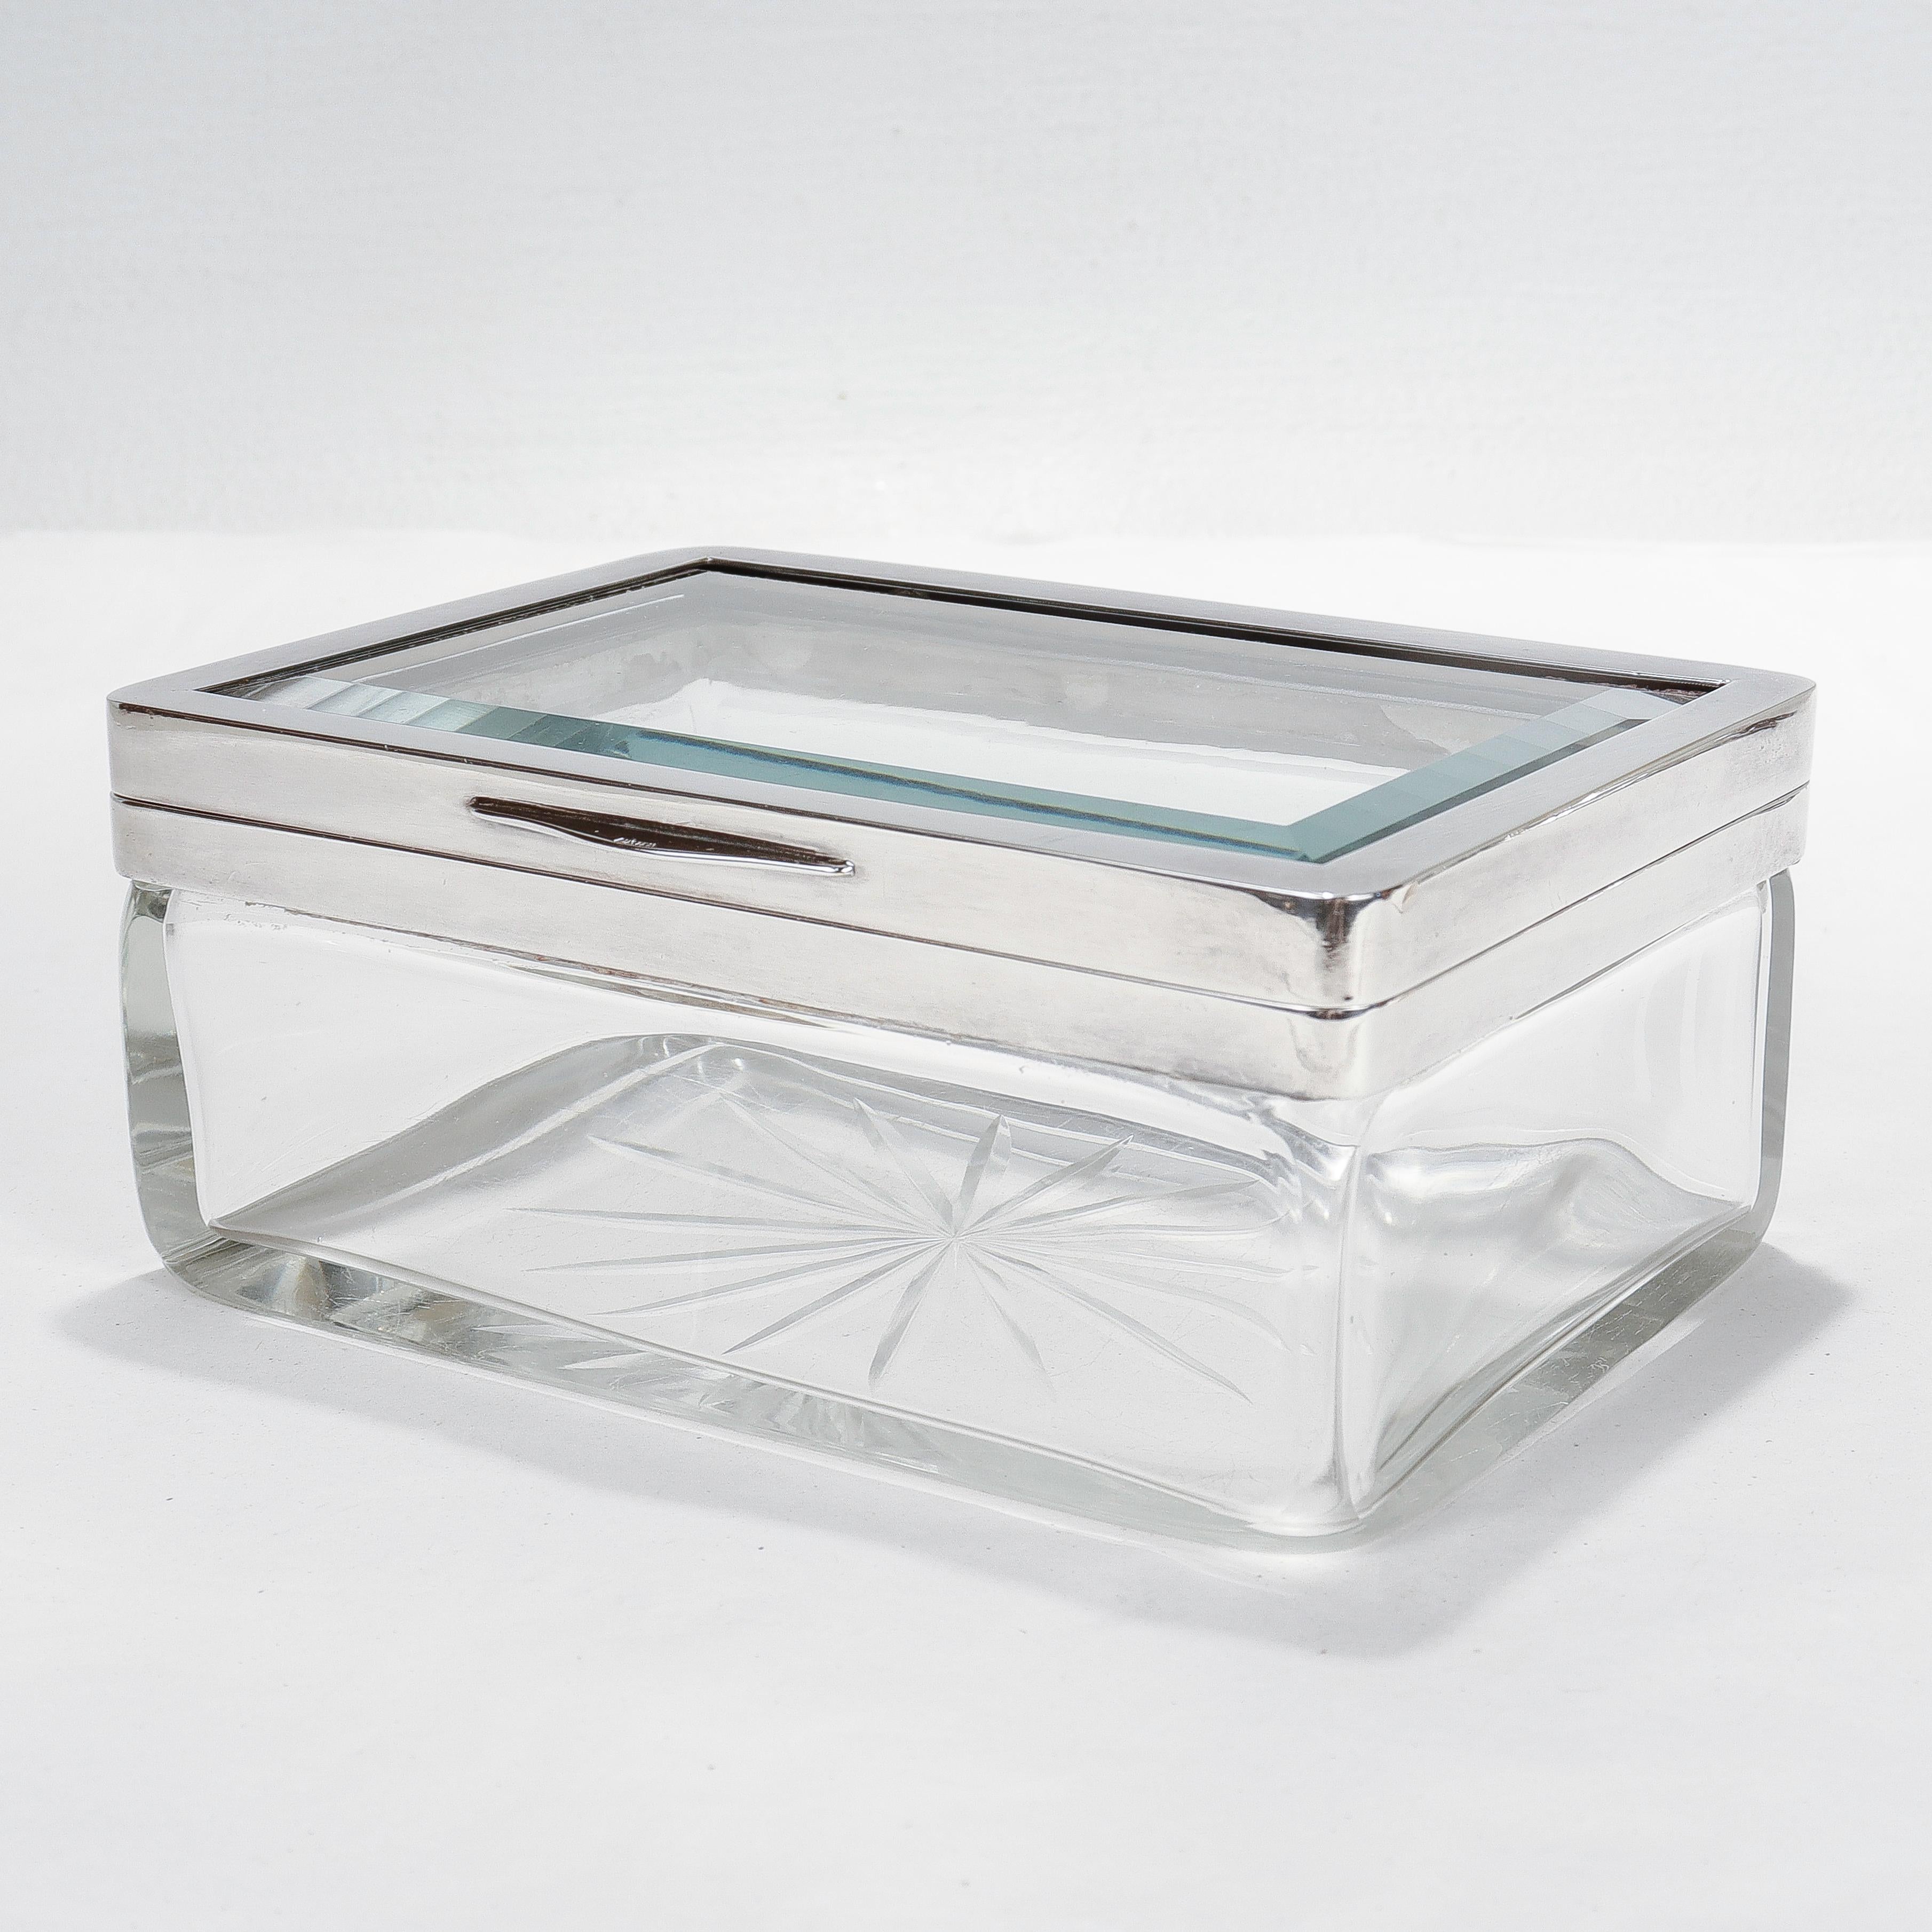 A fine antique Austrian casket or table box.

With a silver plate mount, a beveled glass insert top, and with a mold blown and cut body with a faceted star-cut pontil mark to its base.

Simply a wonderful Deco period box for the desk or table